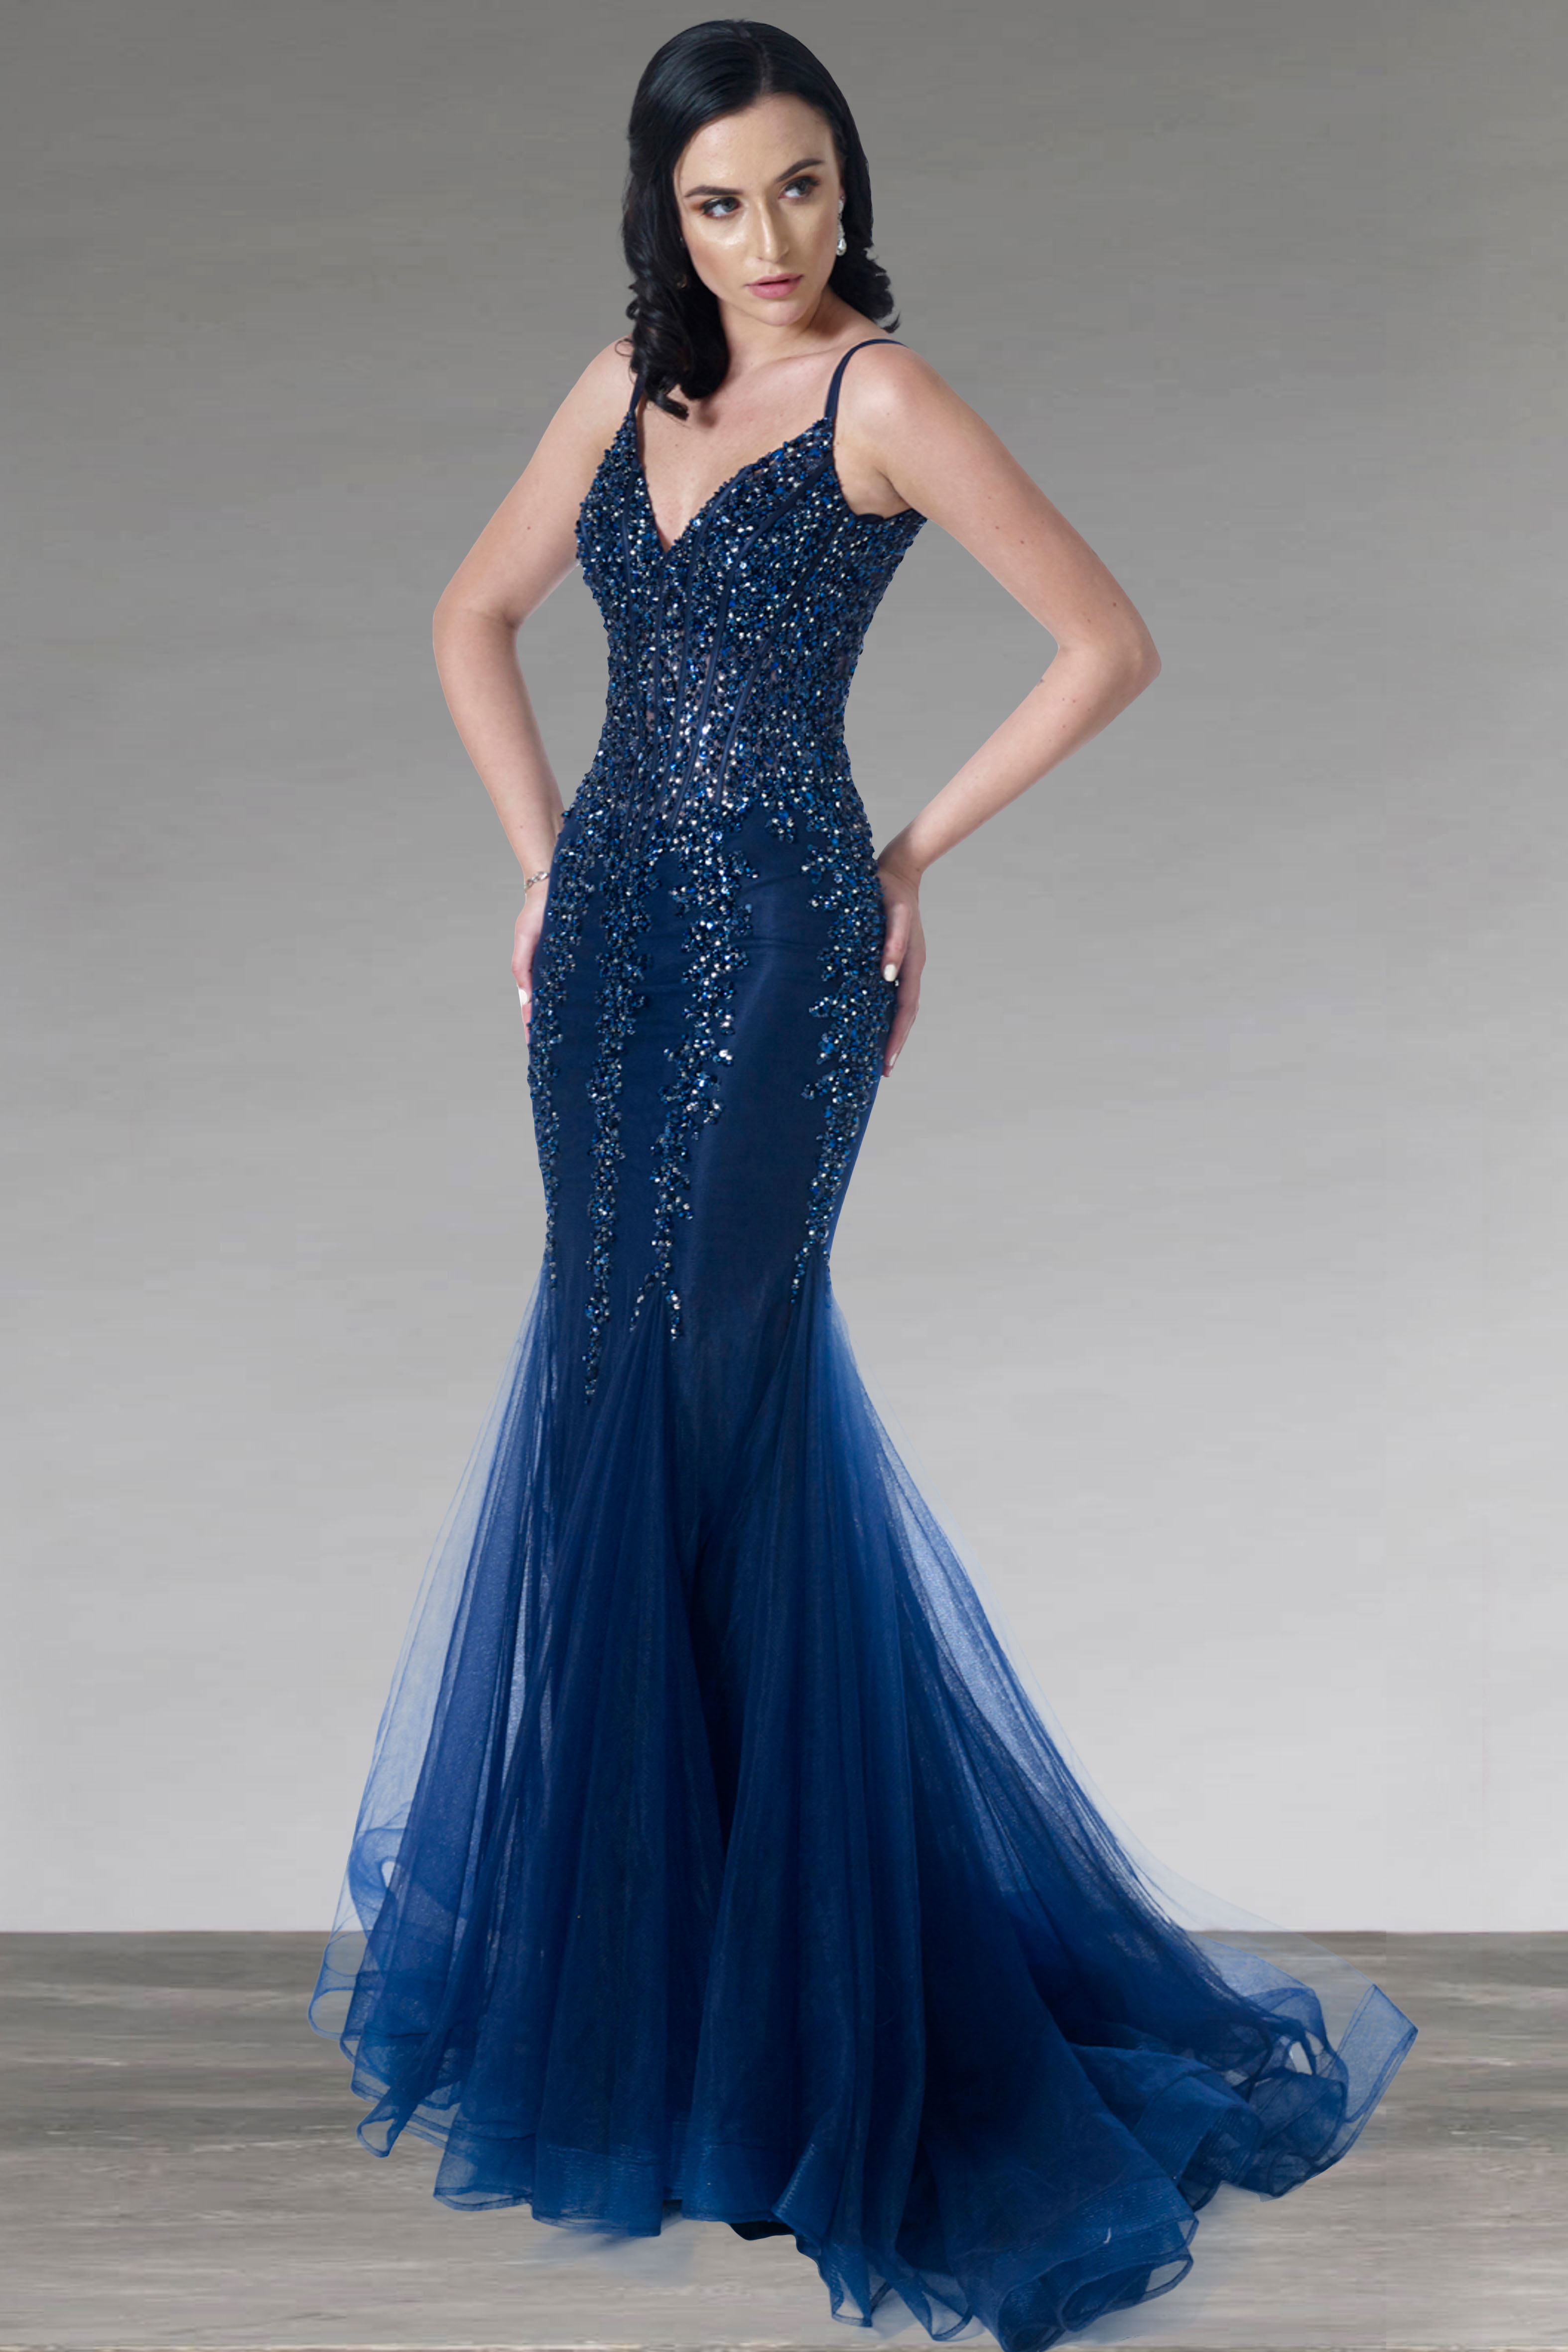 Full length fishtail dress. AF80196 - Catherines of Partick